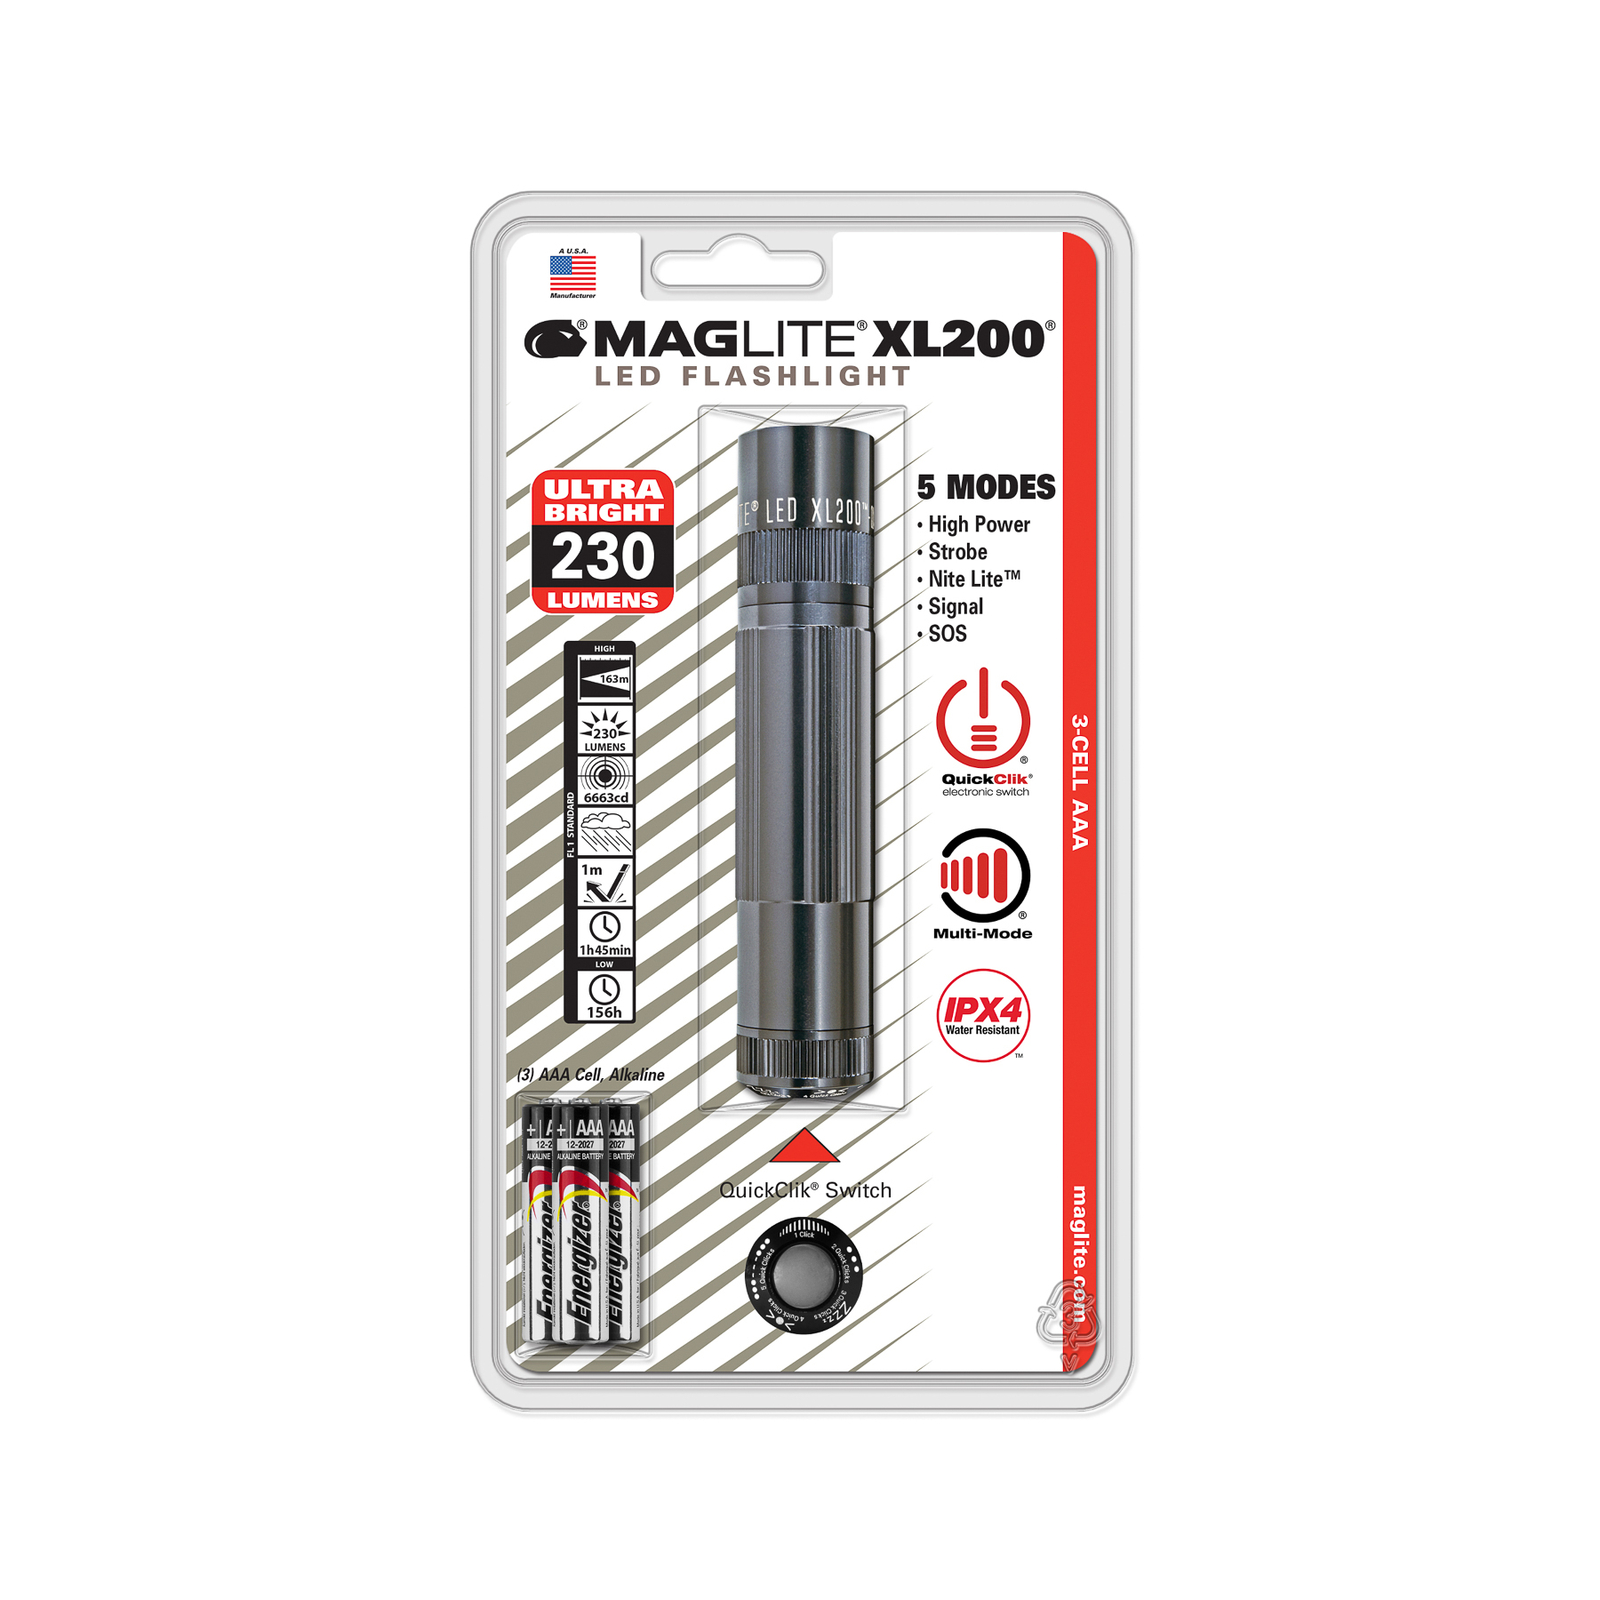 Maglite LED torch XL200, 3-Cell AAA, grey